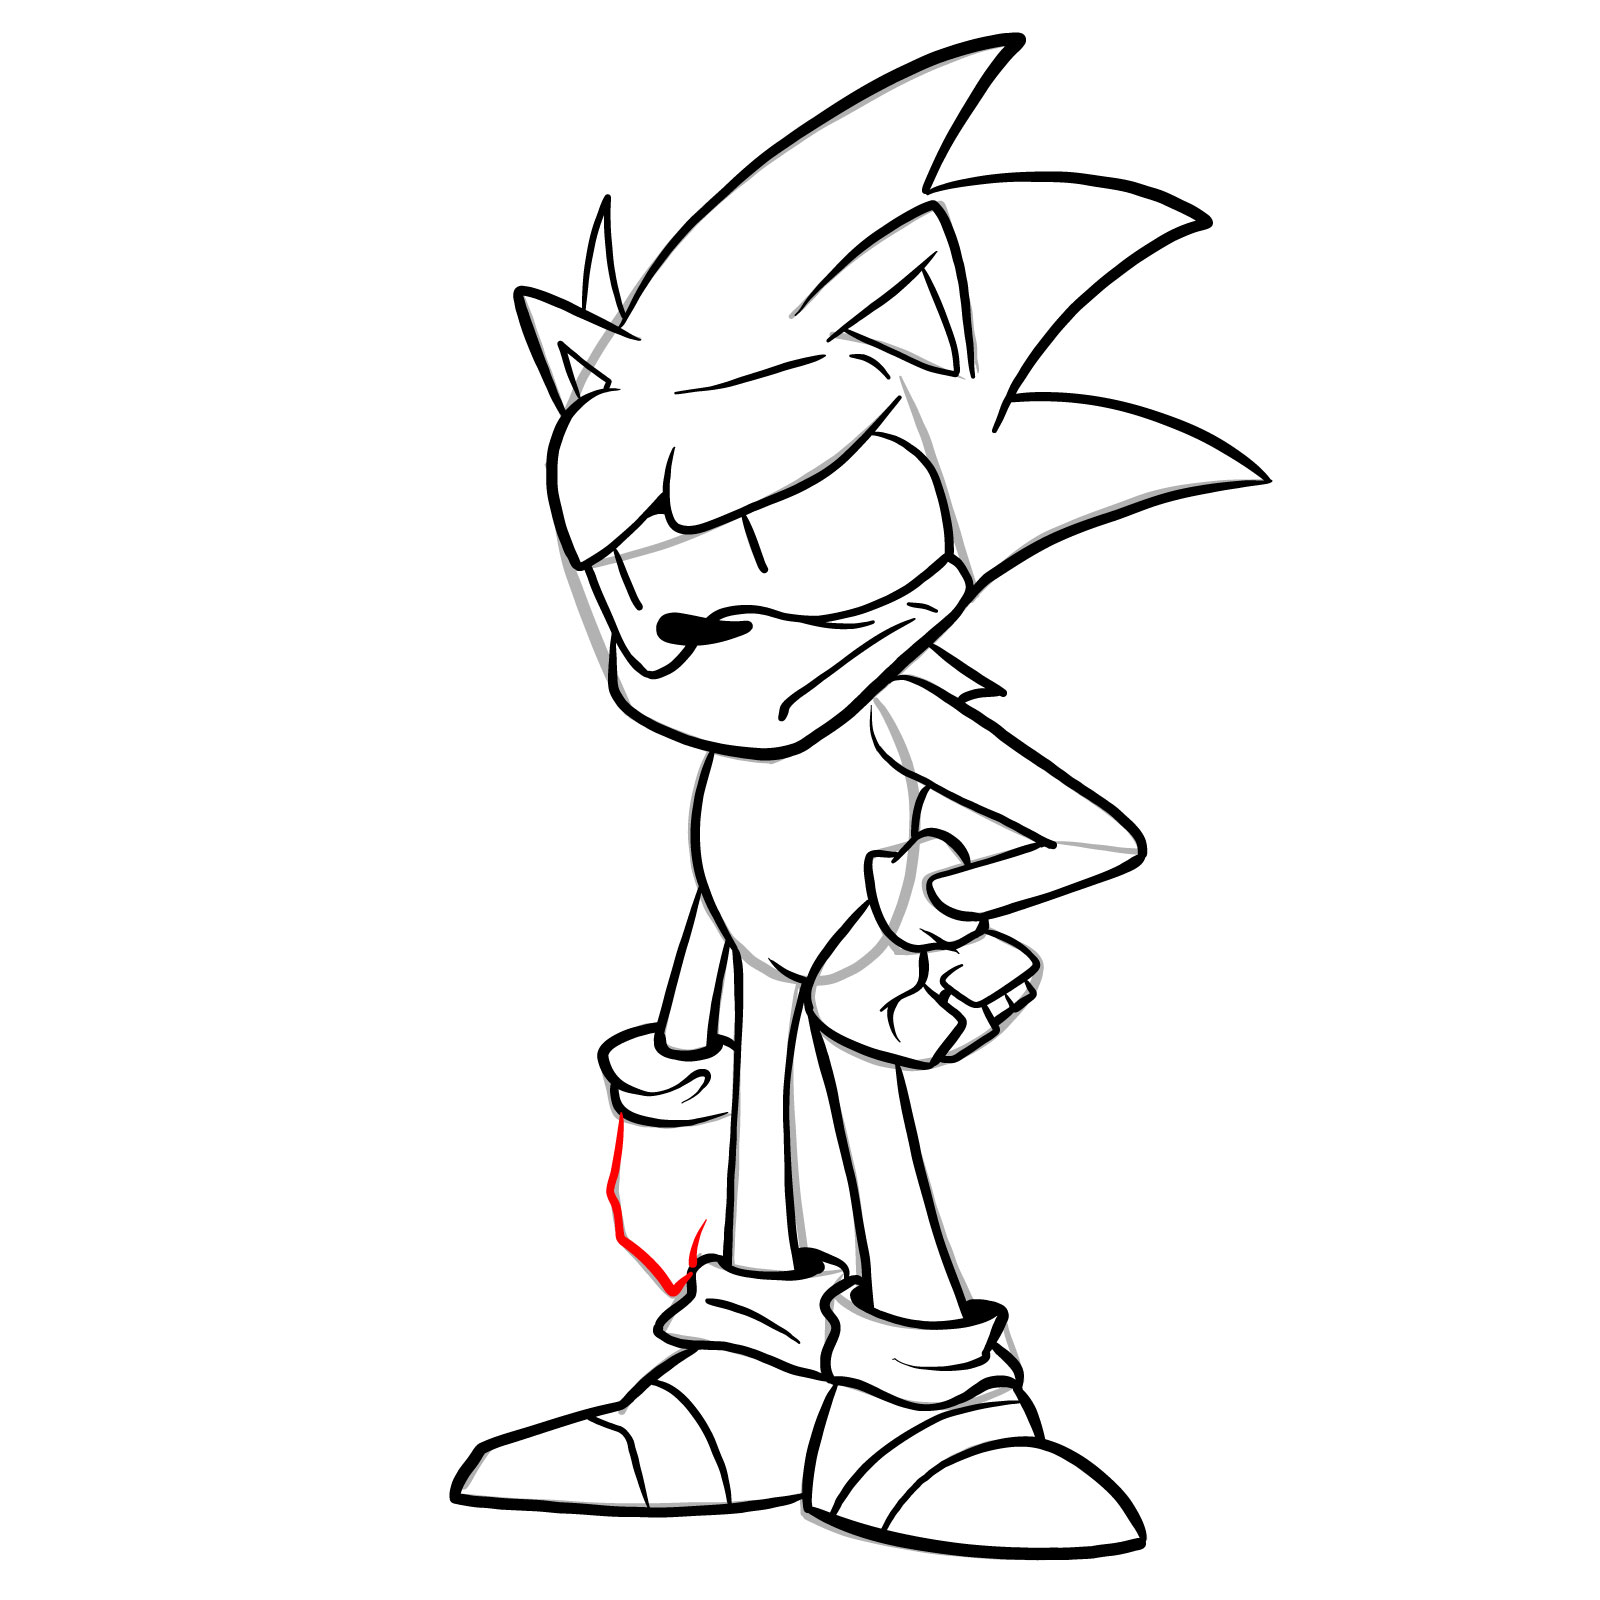 How to draw Sonic - FNF: Secret Histories - step 27